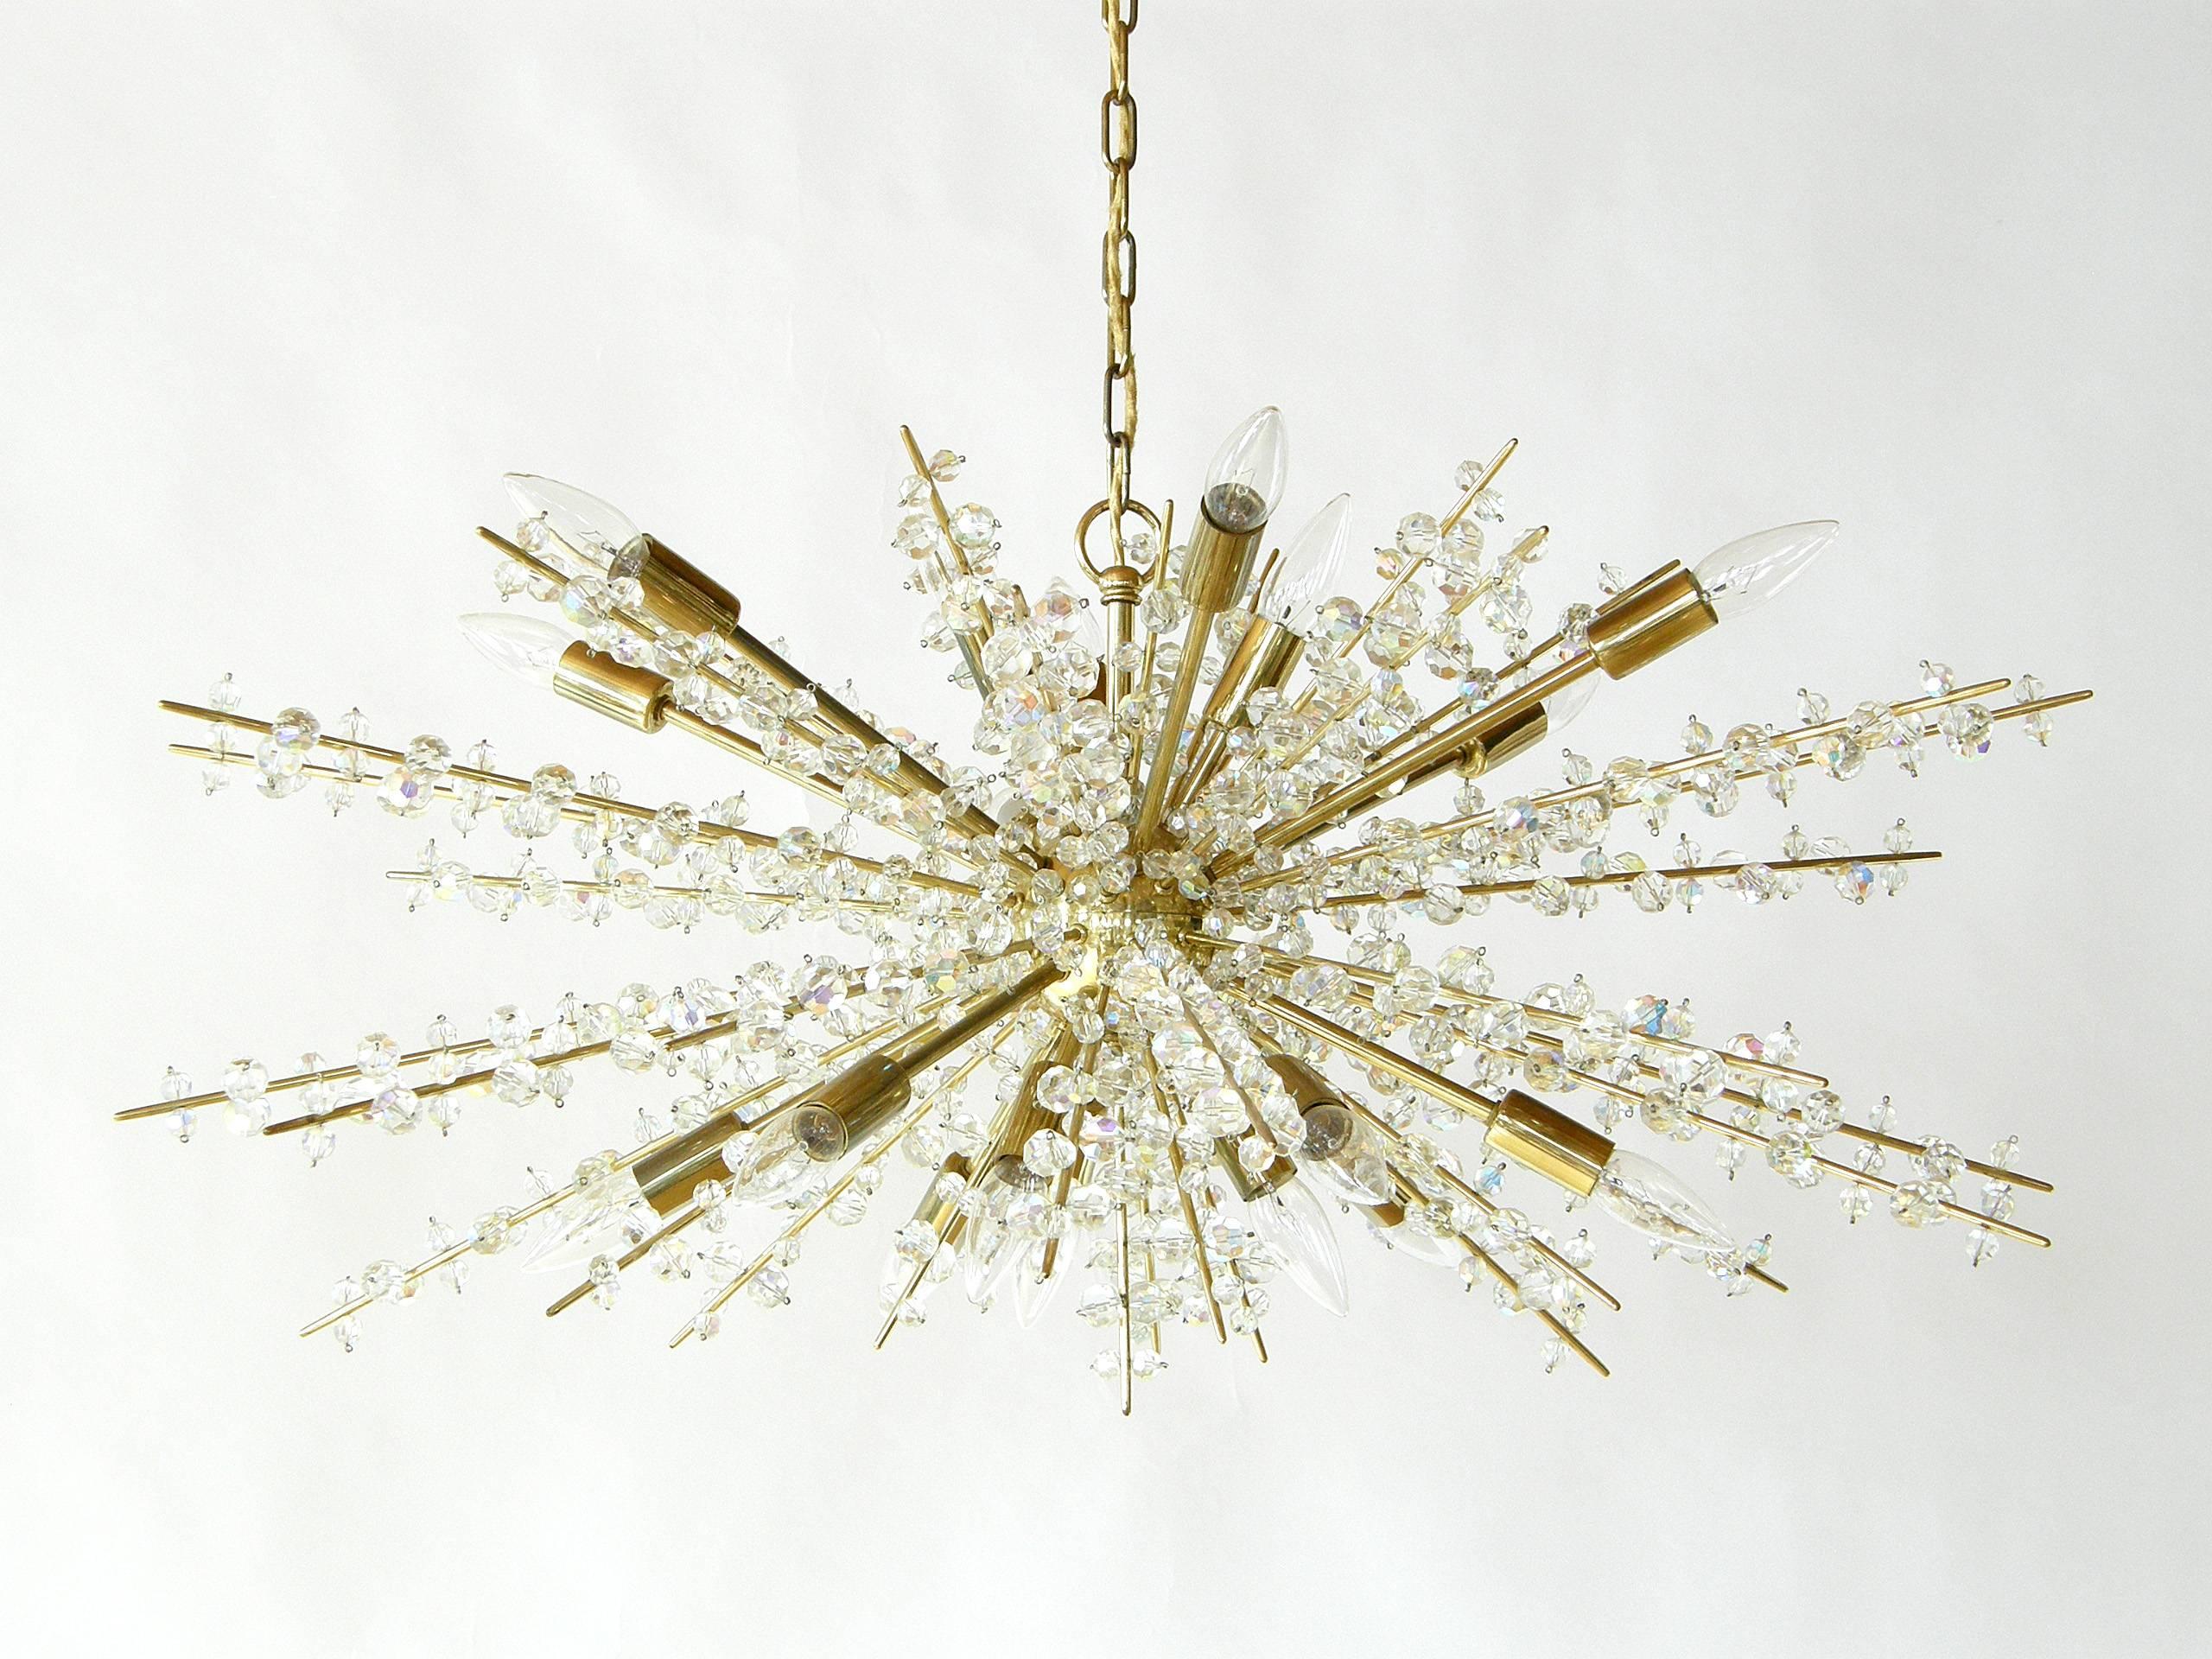 Dramatic and sparkling sputnik chandelier attributed to Bakalowits, Austria. The long spikes are laden with faceted crystals of different sizes. Matching pair of wall sconces are also available.

This fixture has a label from Lite Trend, who